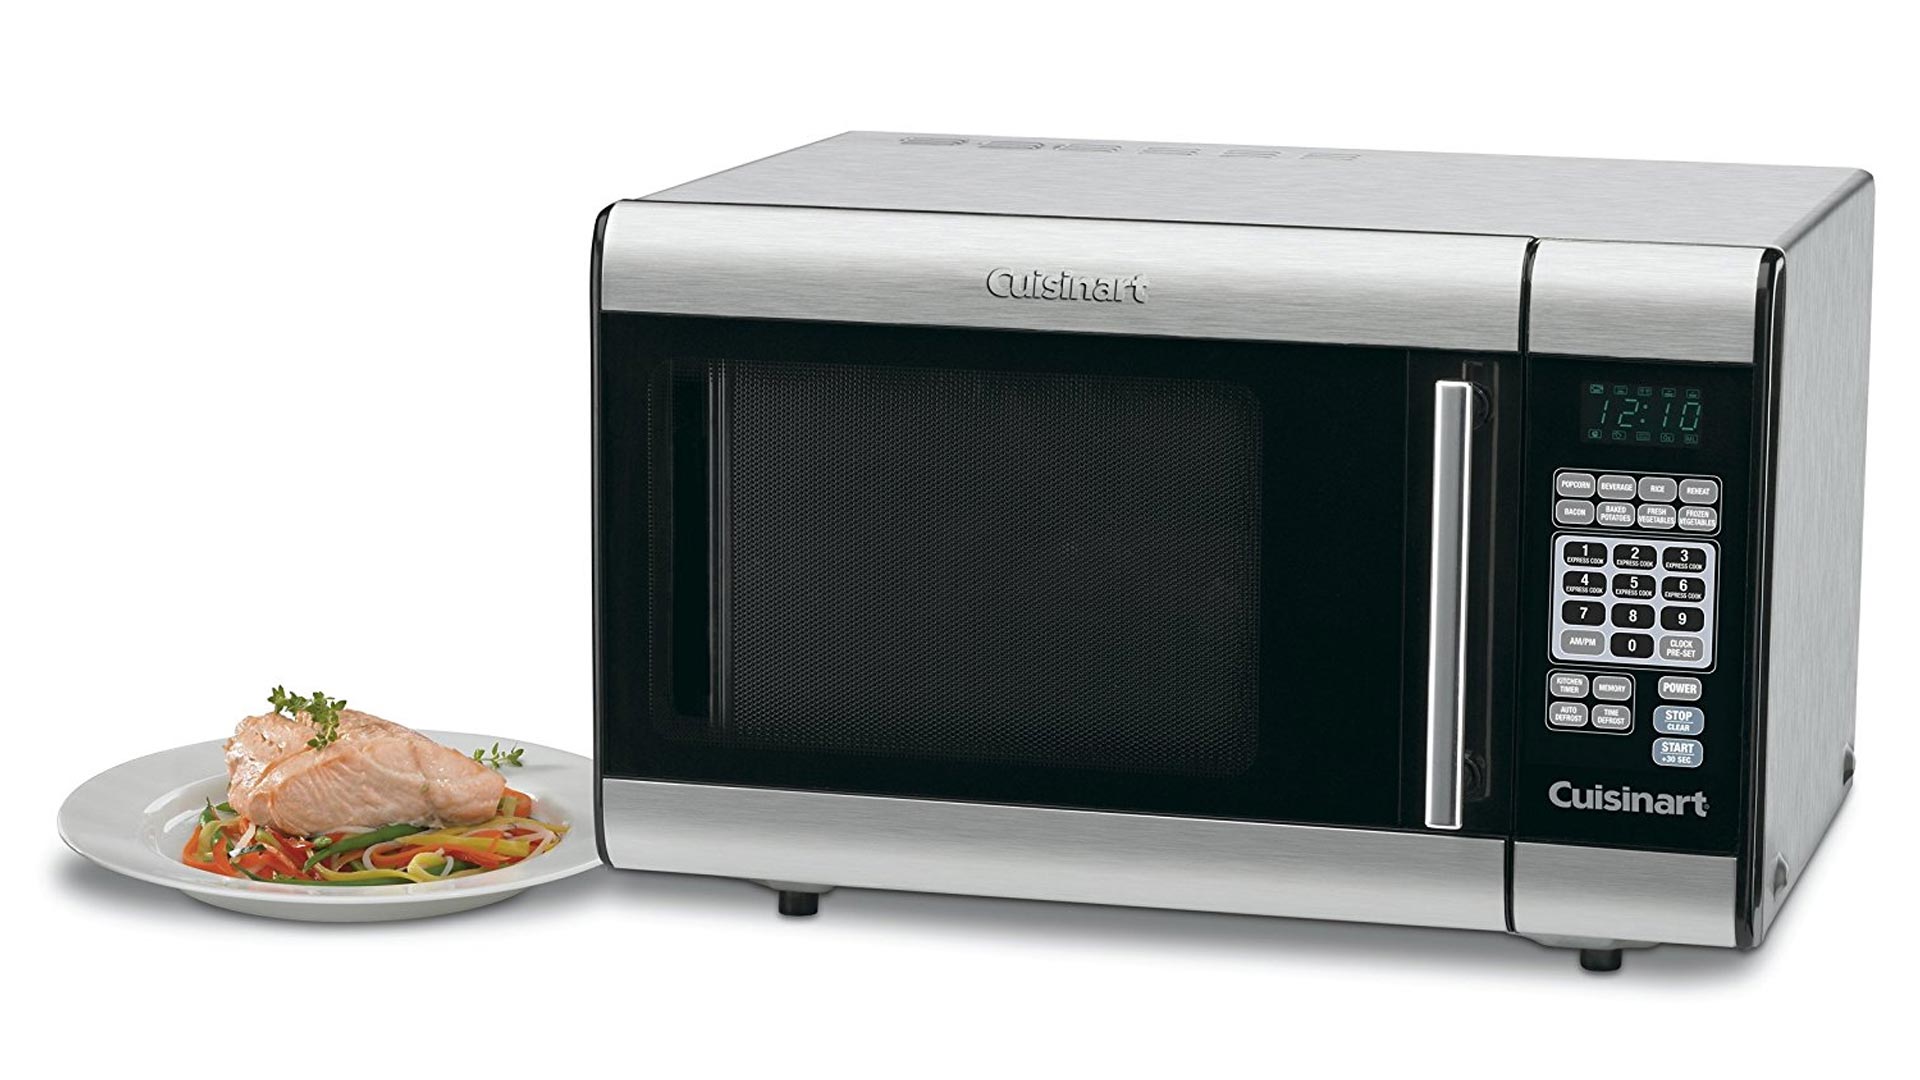 Cuisinart's 1,000W 1-Cu. Ft. Stainless Steel Microwave drops to $100 (Reg.  $140+)